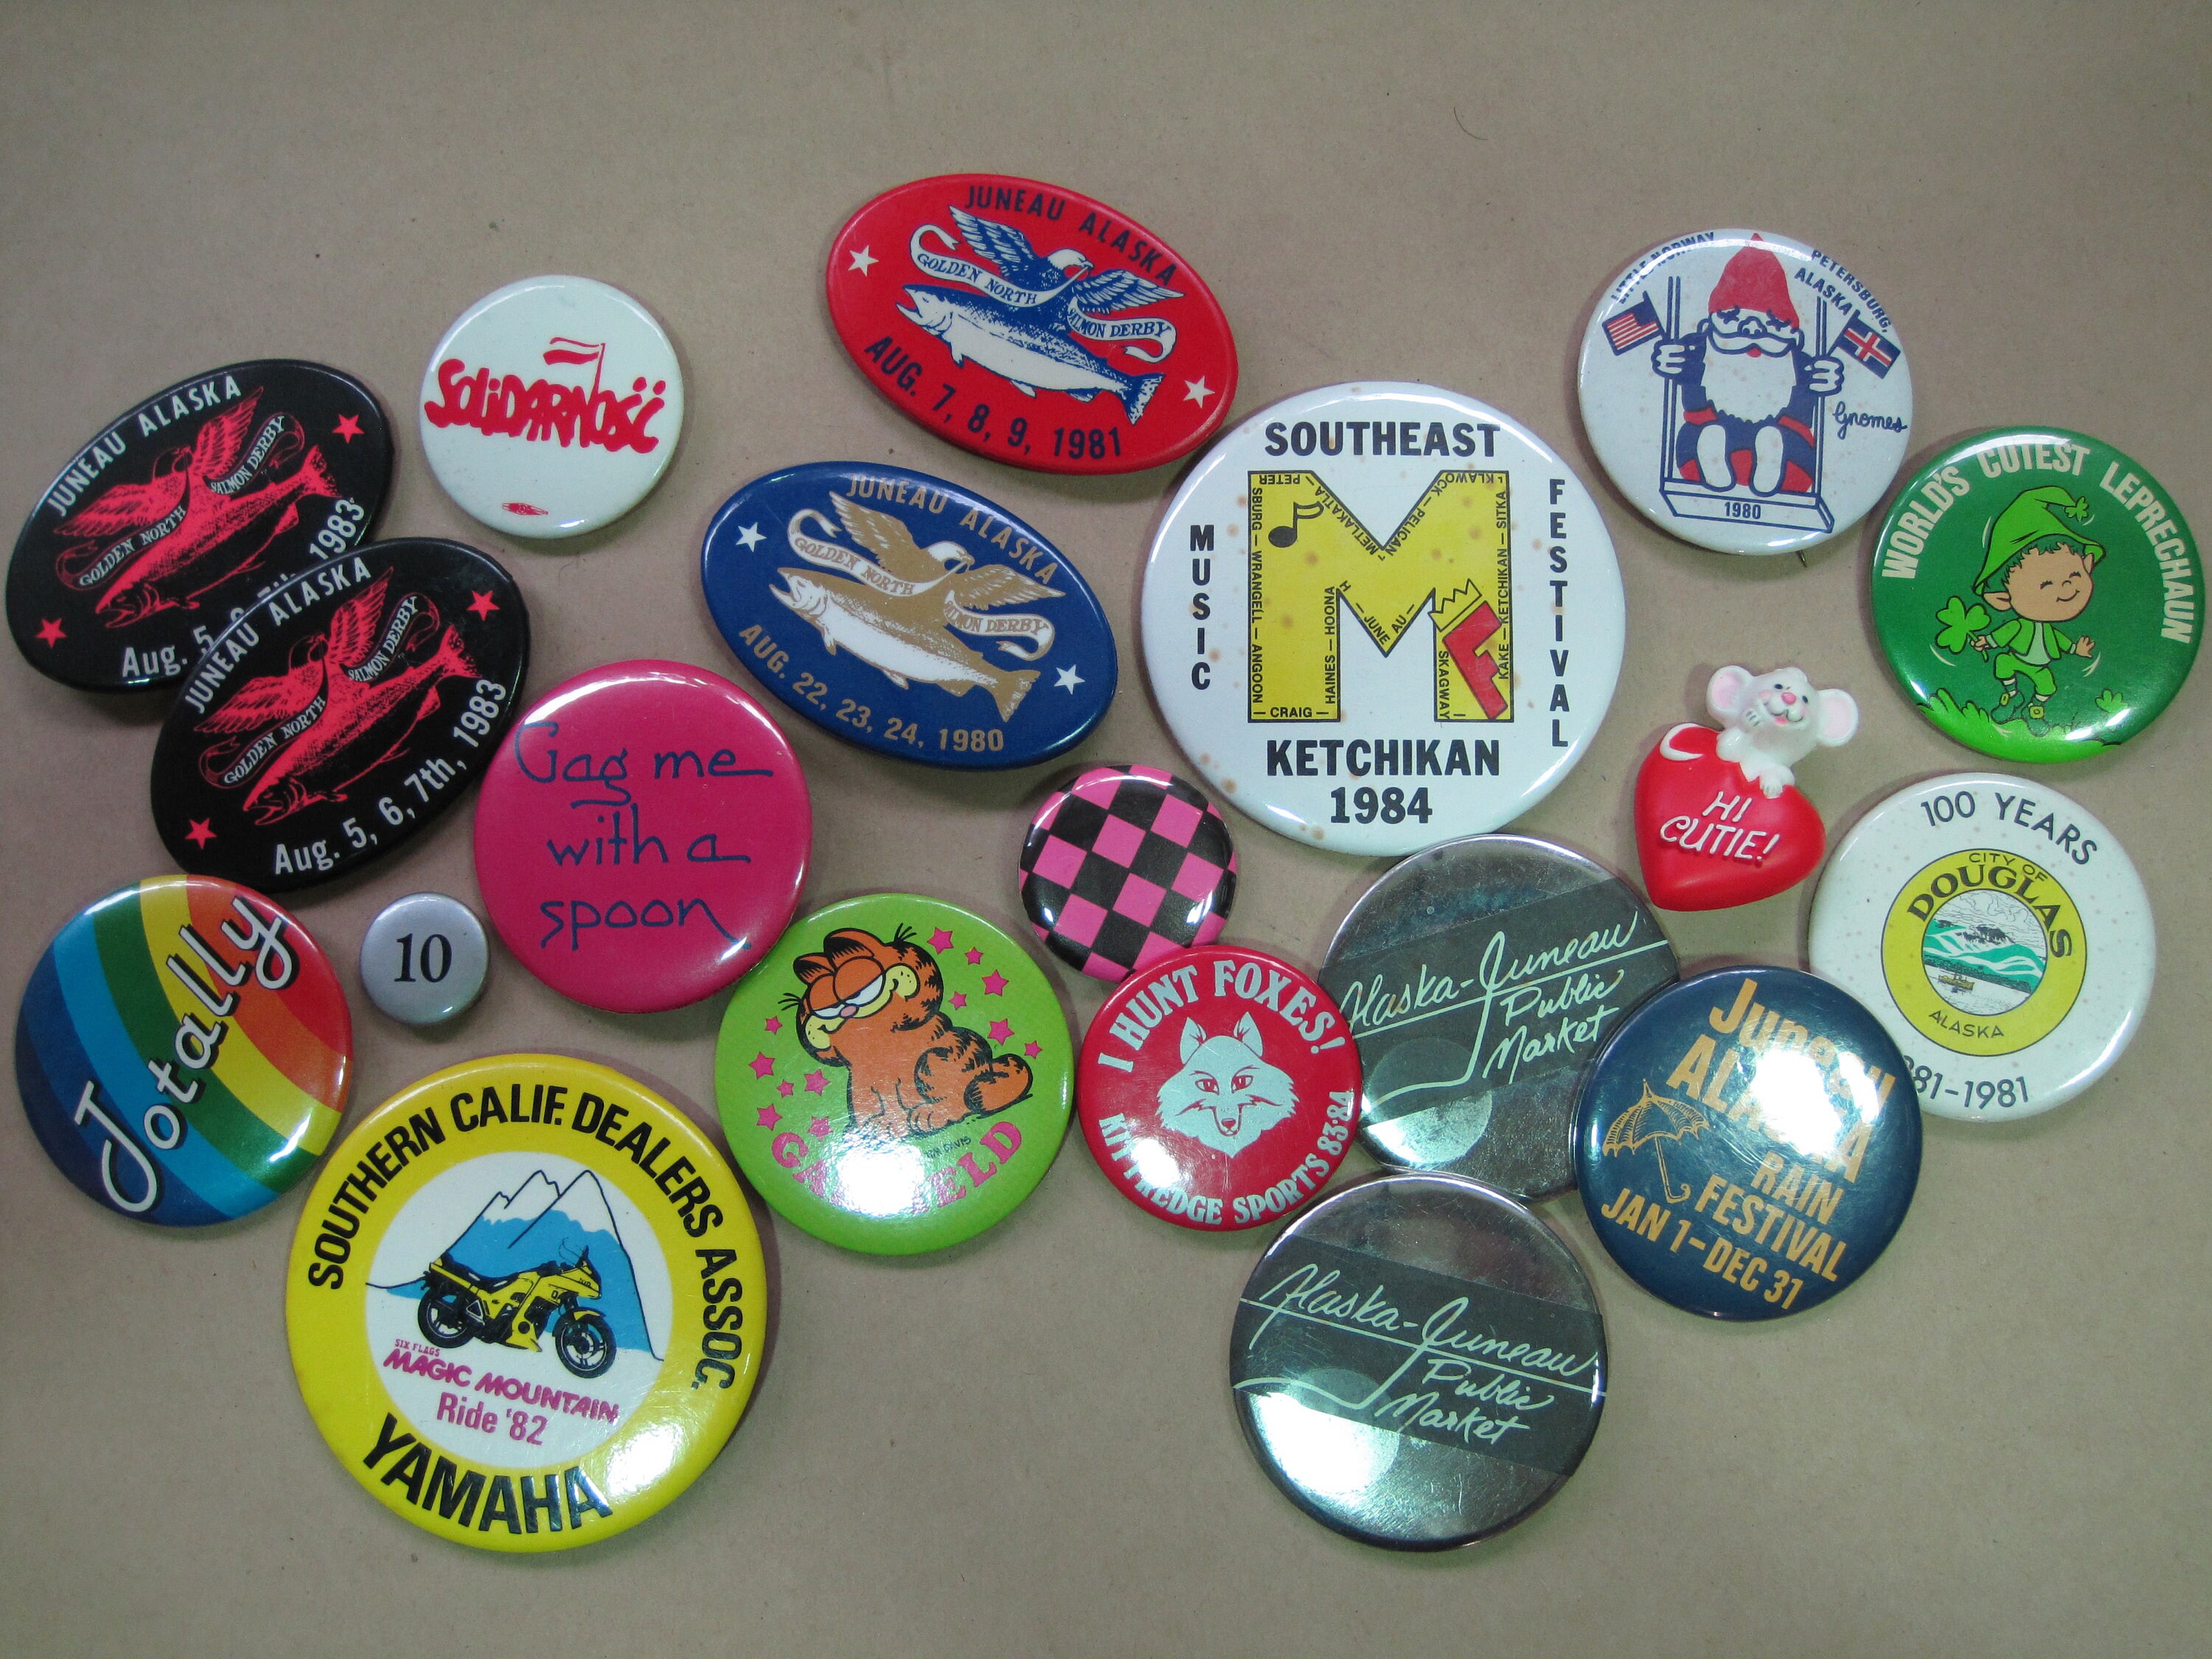 80s Mall Pin Buttons Lot of 31 // Vintage Pin Back Button